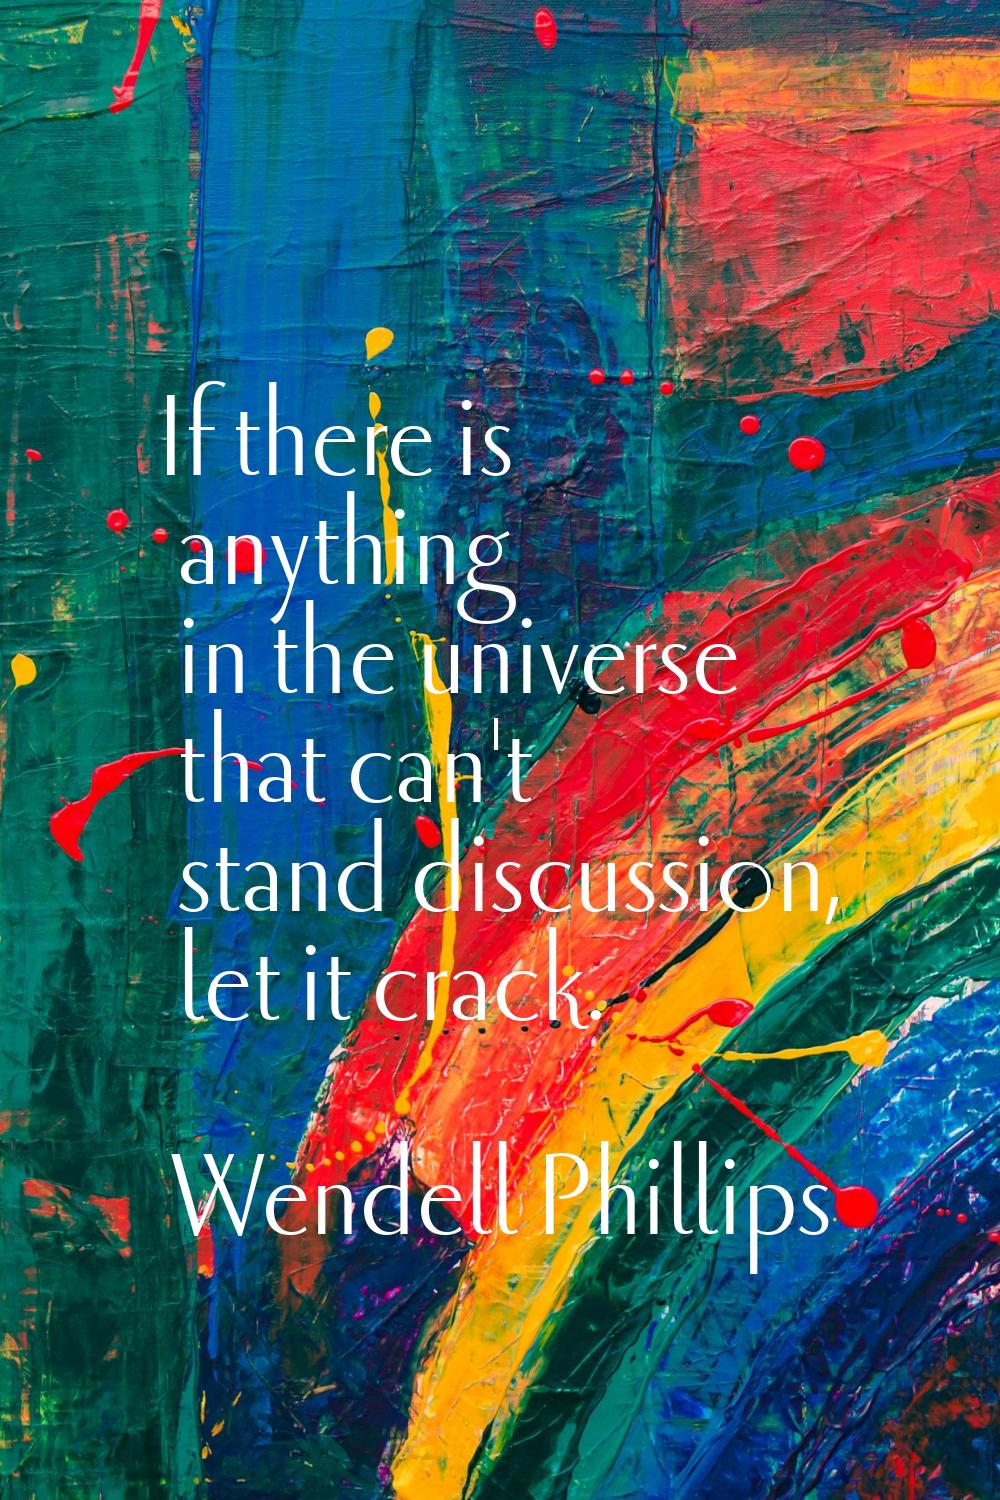 If there is anything in the universe that can't stand discussion, let it crack.